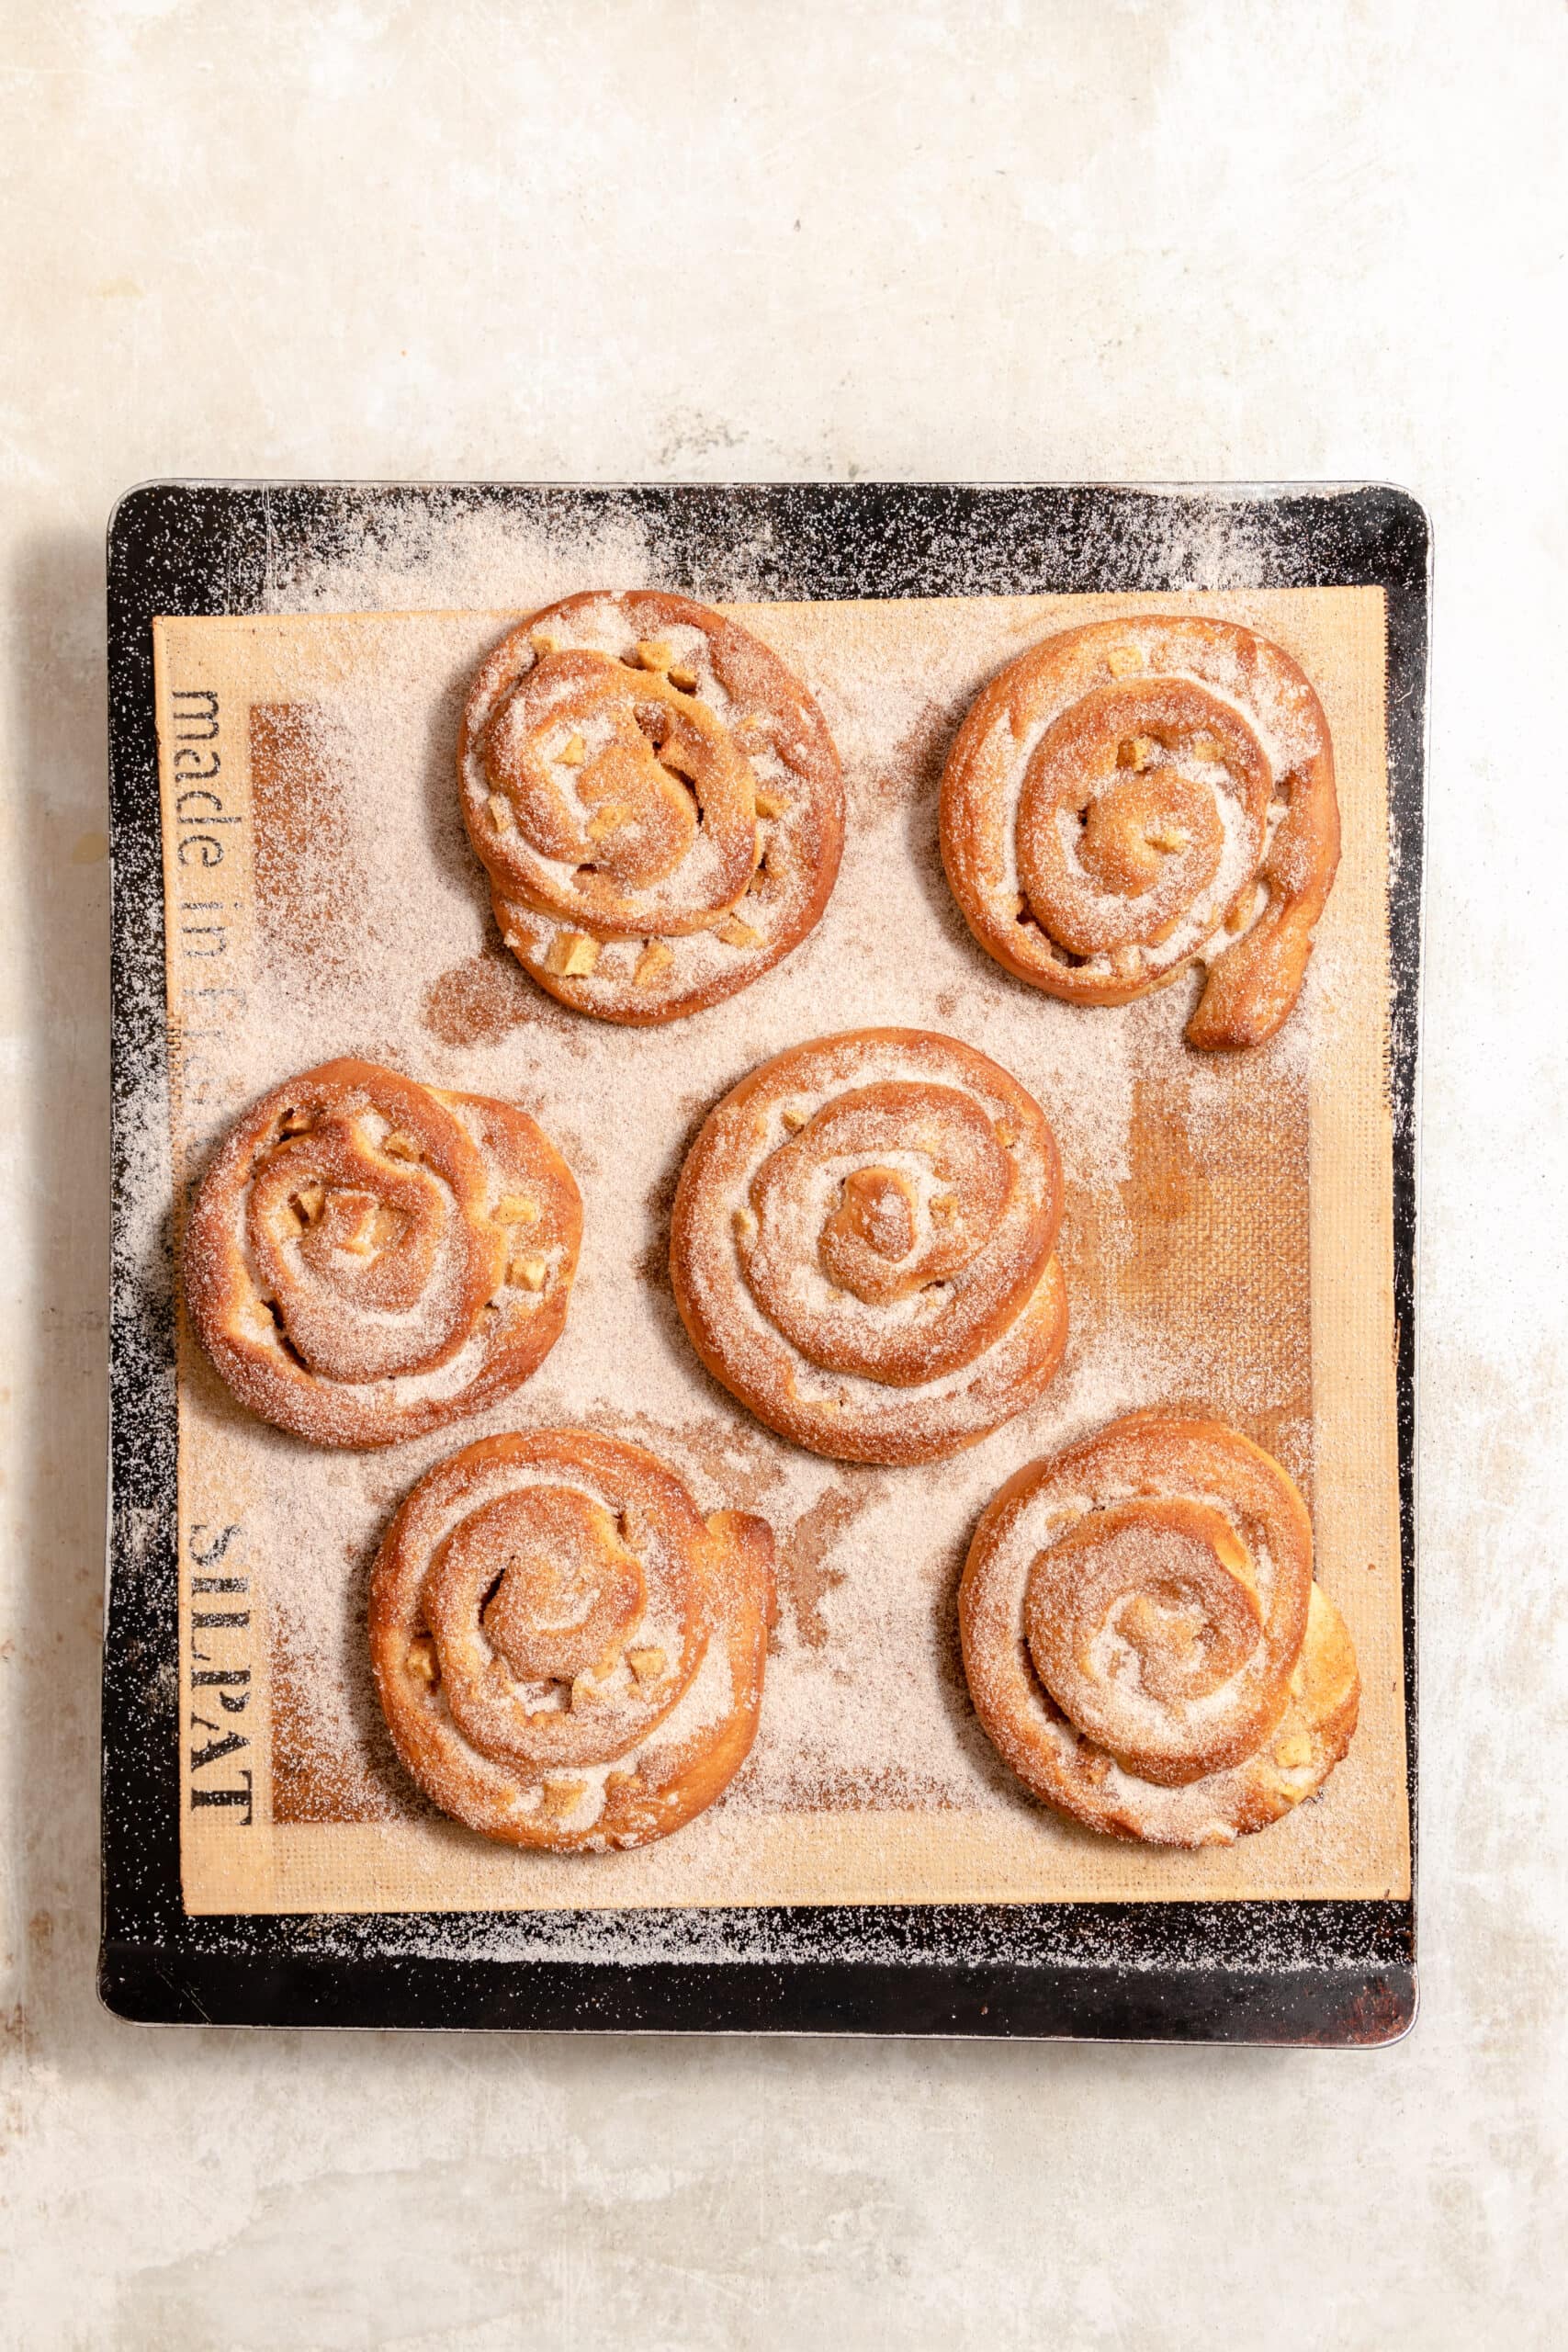 Overhead image of the apfelschnecken freshly baked and sprinkled with cinnamon sugar.